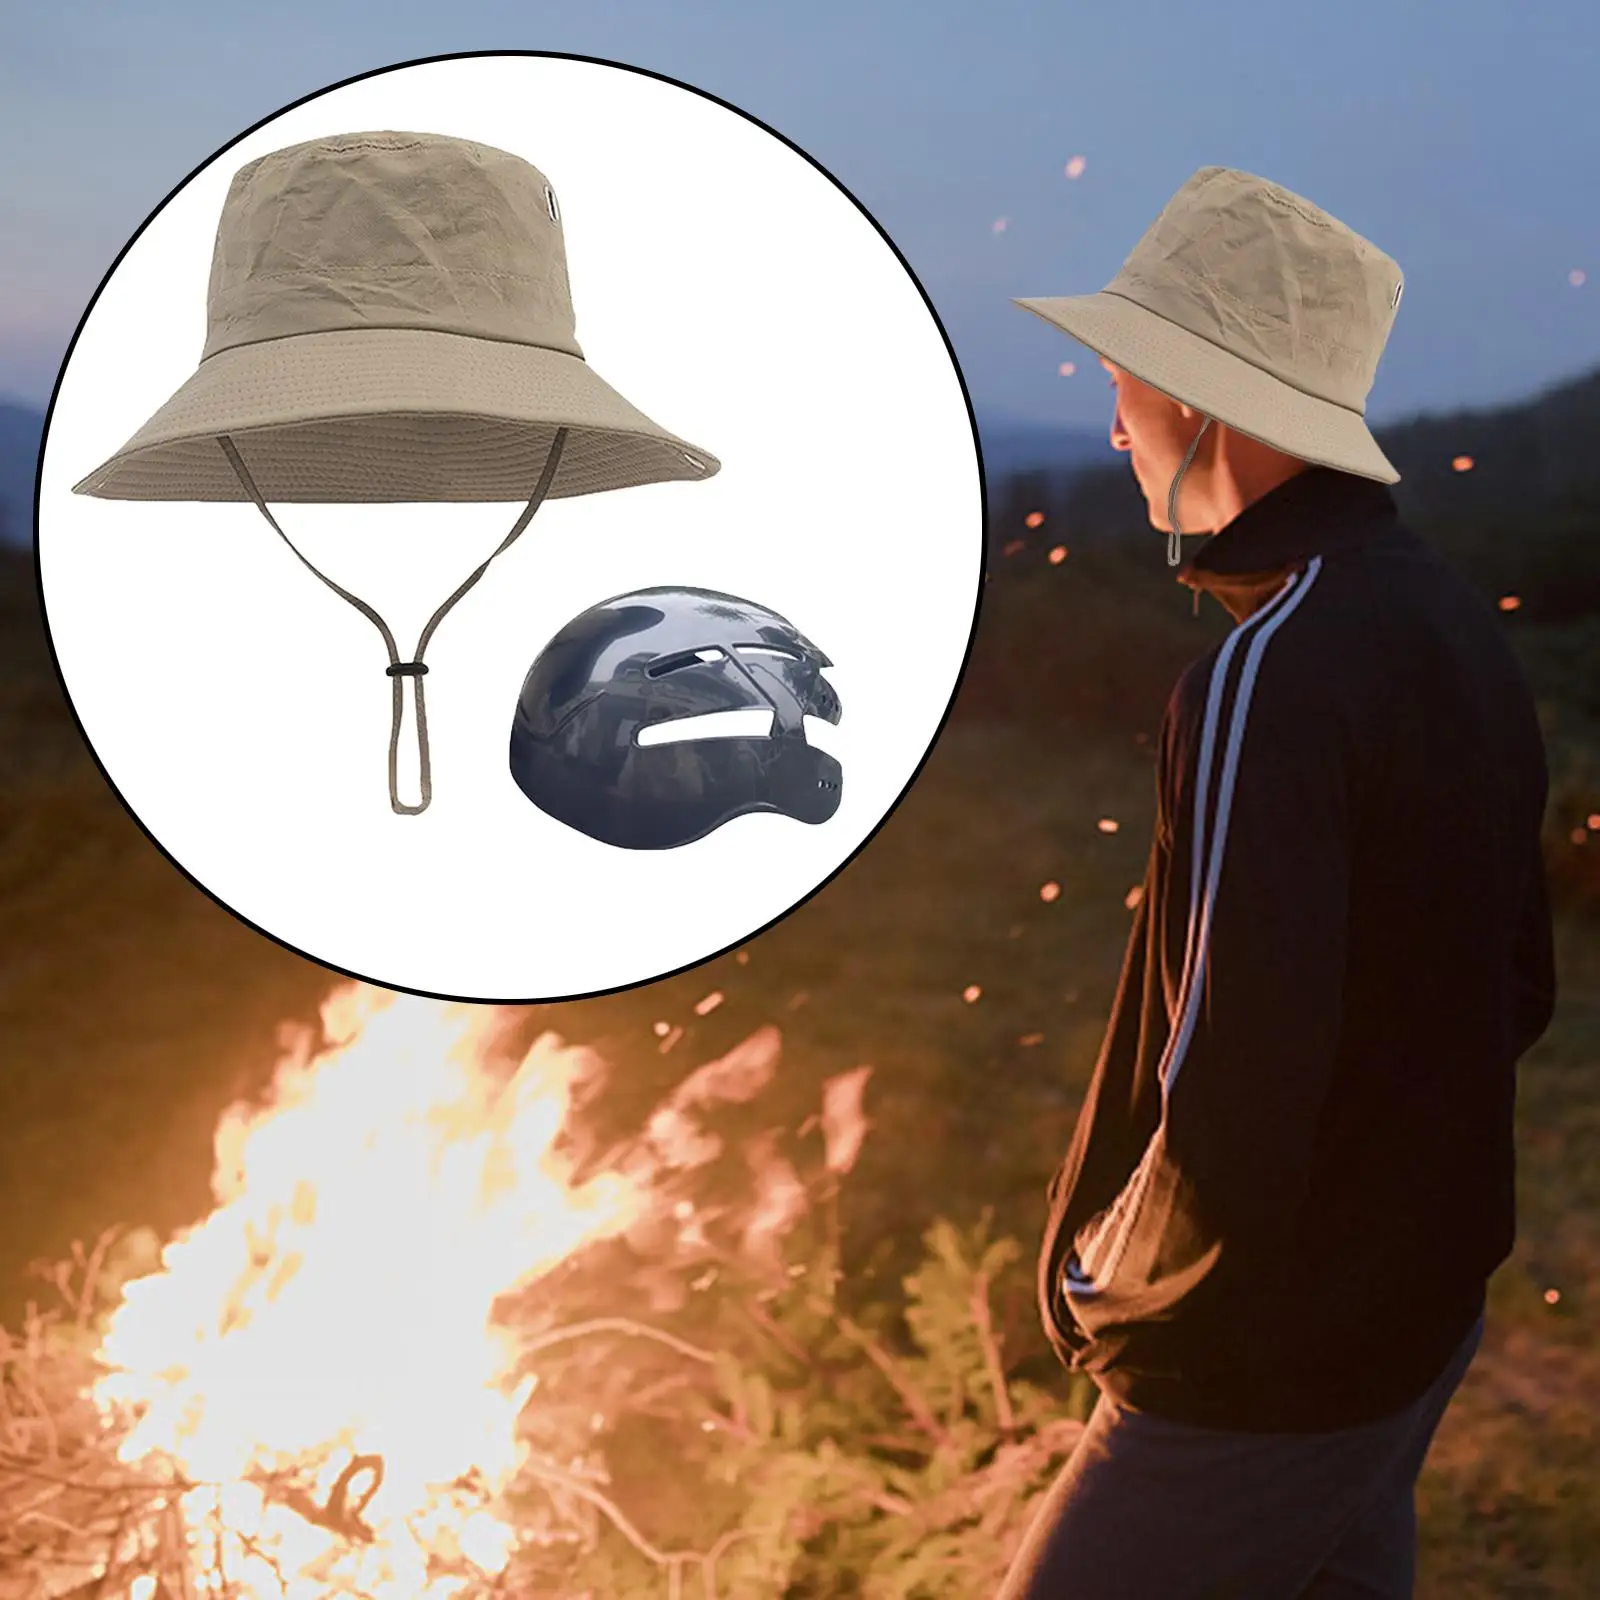 Bucket Hat with Strings Foldable Wide Brim for Sun Protection Packable Sun Hat with Strap for Getaway Beach Fishing Outdoor